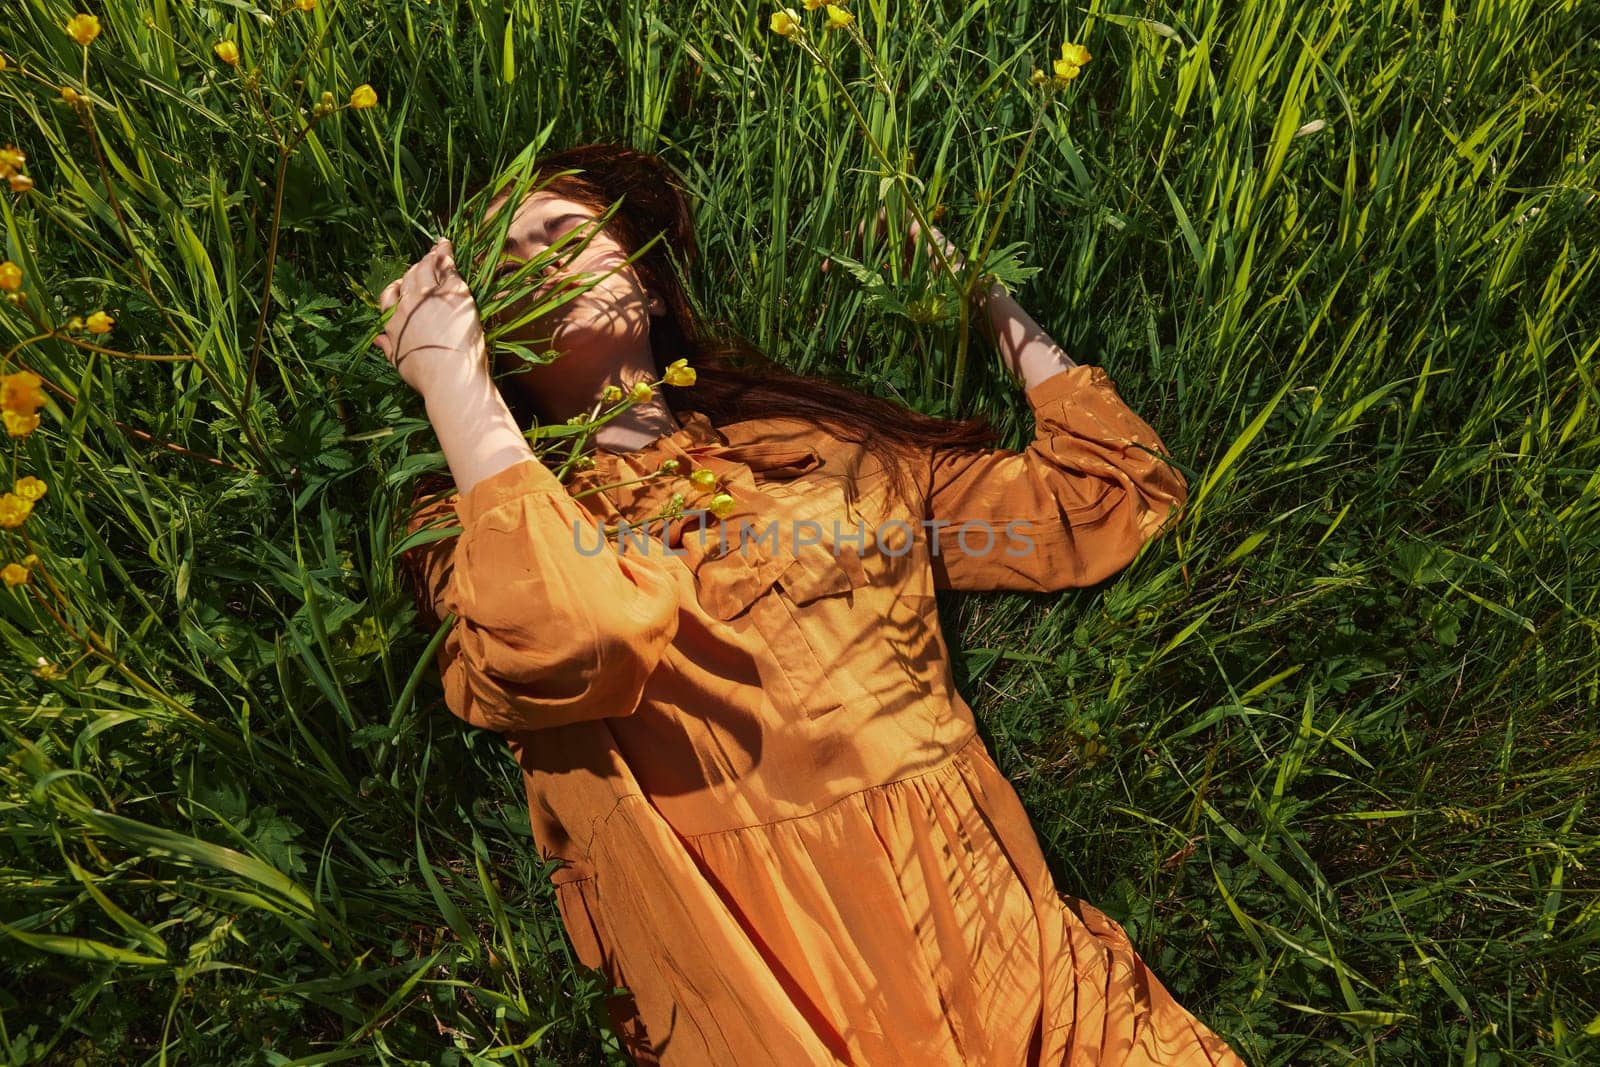 a calm woman with long red hair lies in a green field with yellow flowers, in an orange dress with her eyes closed, touching blades of grass with her hands, enjoying peace and recuperating. High quality photo